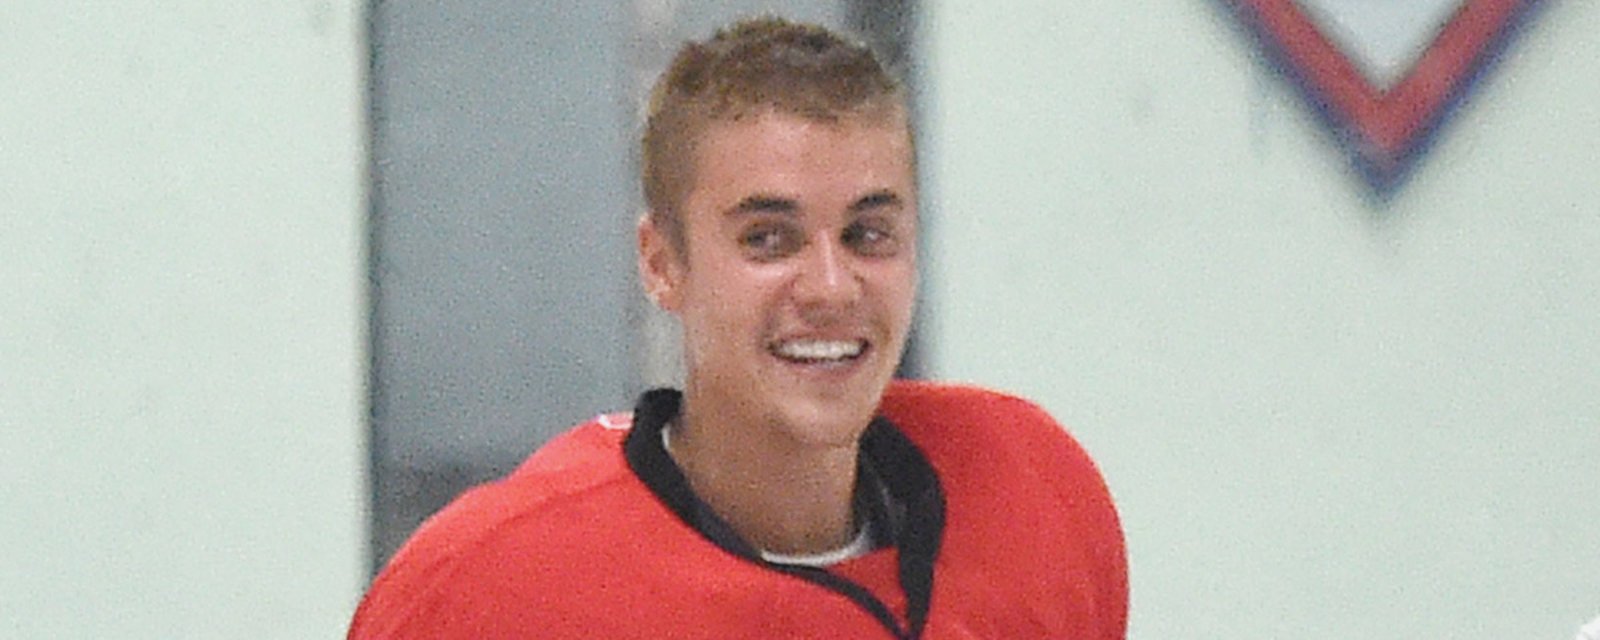 Must see : Justin Bieber will be challenging Blackhawks players in skills competition. 